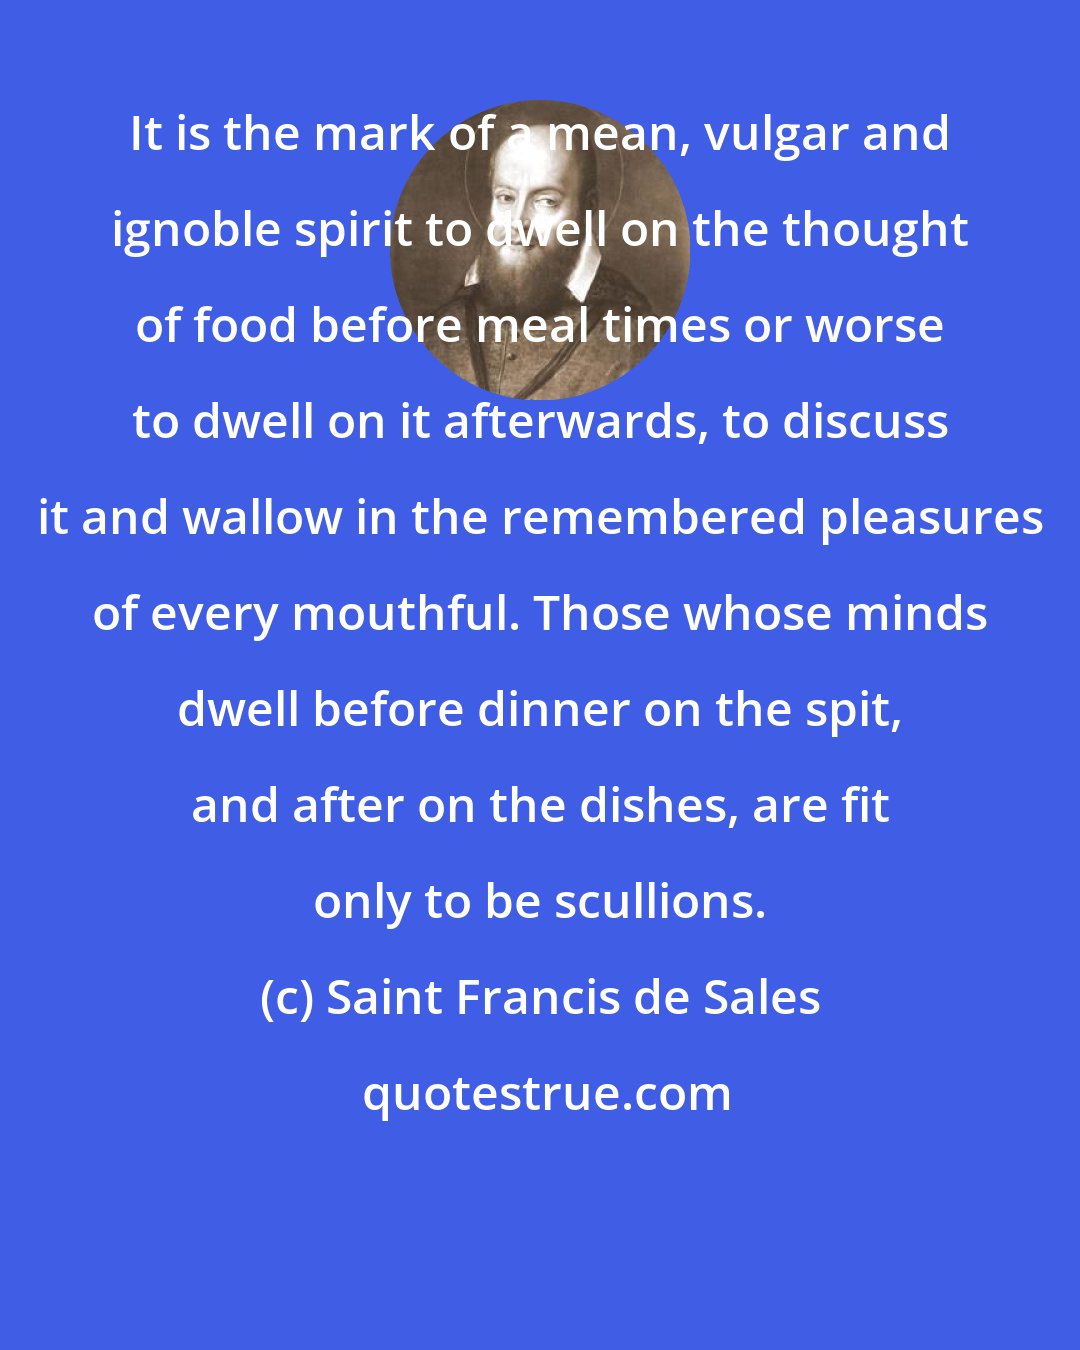 Saint Francis de Sales: It is the mark of a mean, vulgar and ignoble spirit to dwell on the thought of food before meal times or worse to dwell on it afterwards, to discuss it and wallow in the remembered pleasures of every mouthful. Those whose minds dwell before dinner on the spit, and after on the dishes, are fit only to be scullions.